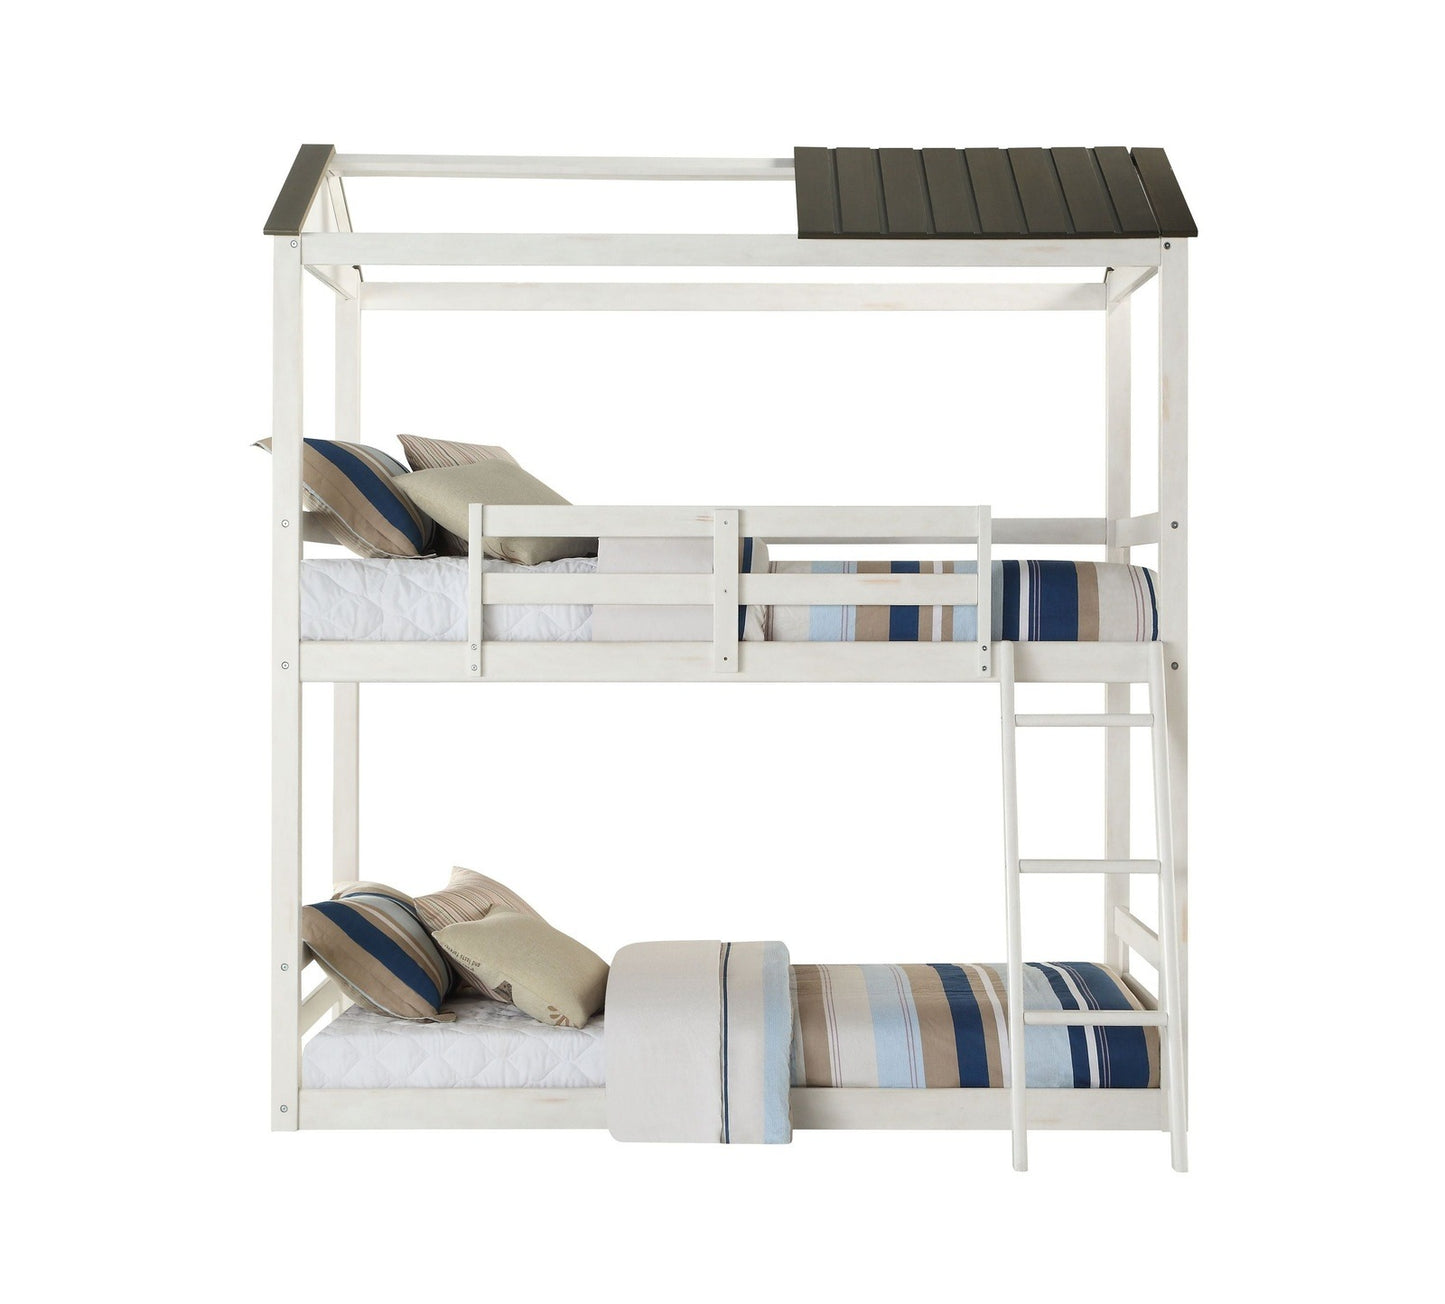 ACME Nadine Cottage Bunk Bed Twin/Twin , Weathered White & Washed Gray 1Set/3Ctn 37665